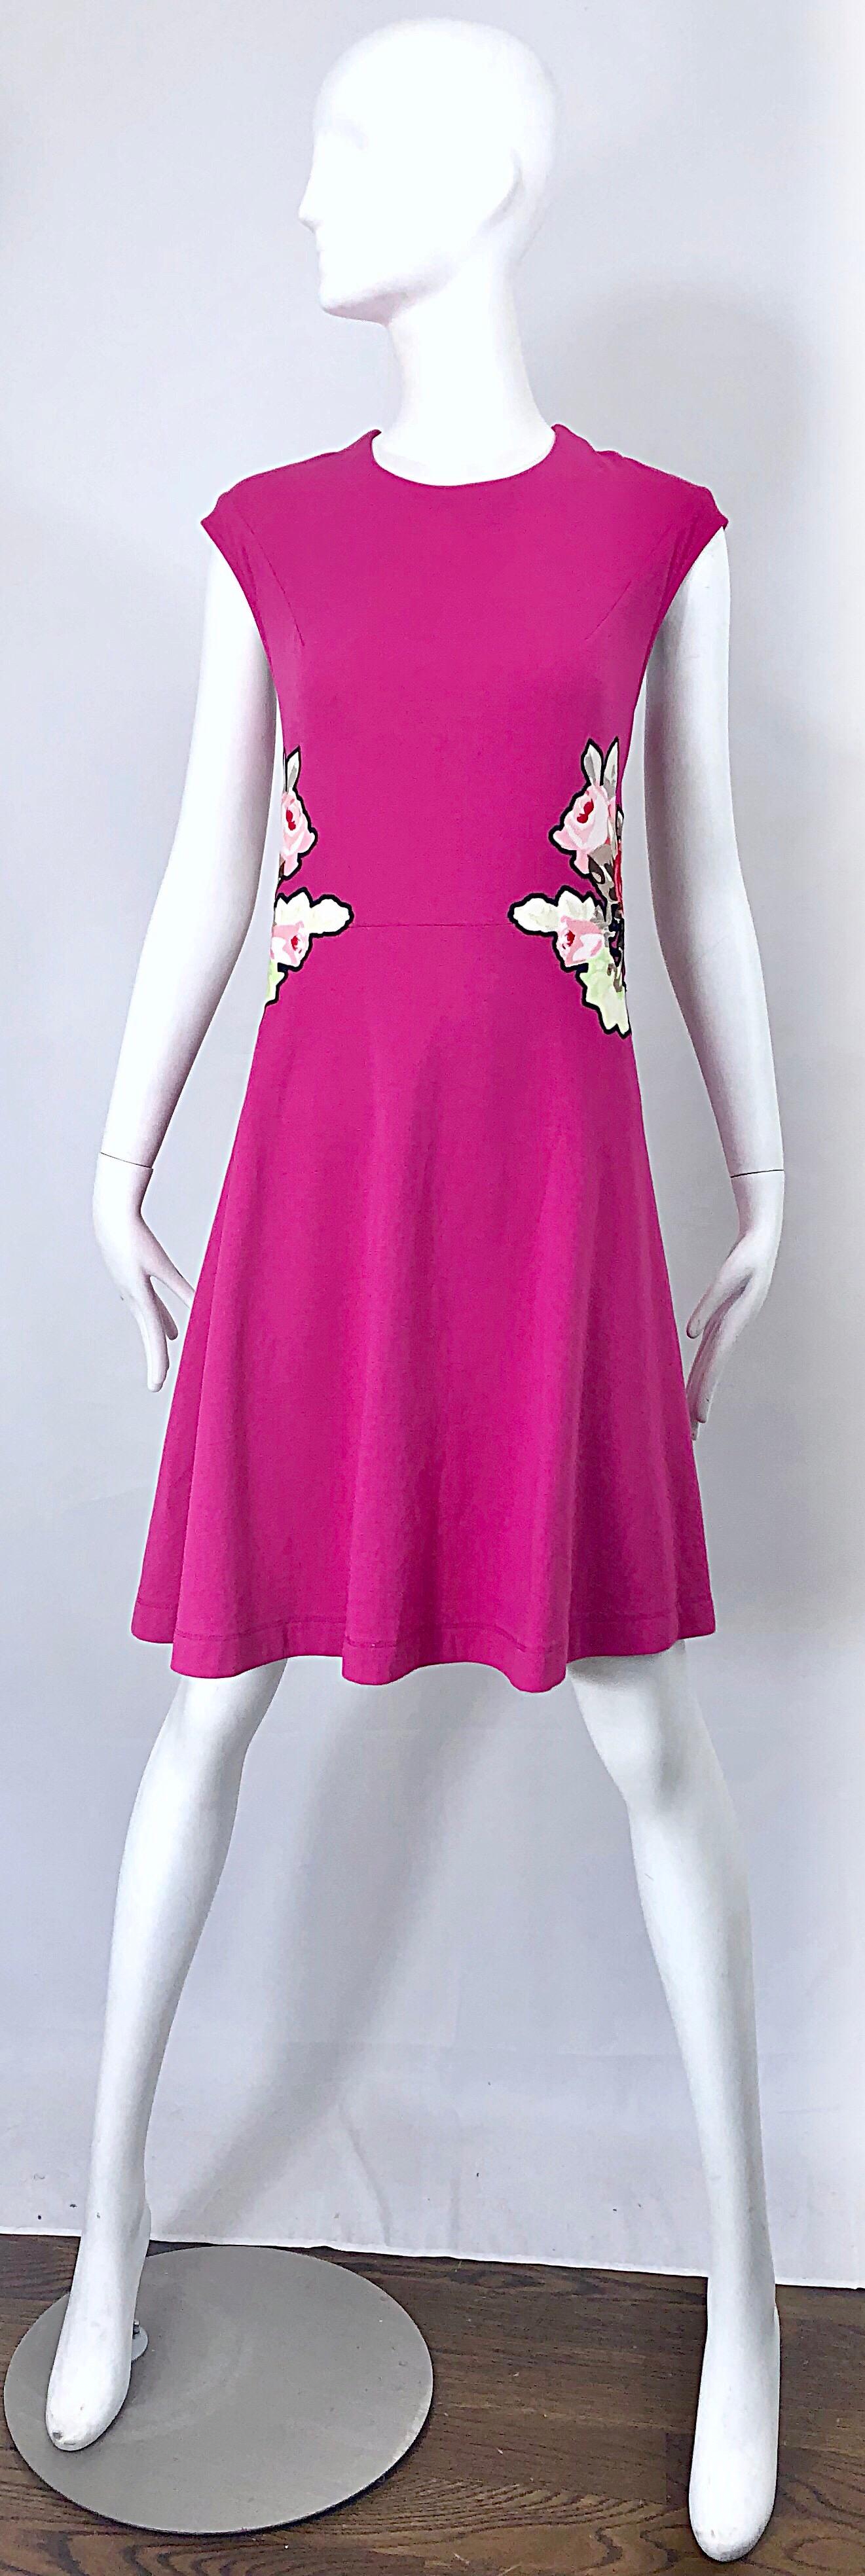 Carven Hot Pink Bouquet of Roses Sleeveless Cotton A - Line Dress Size Medium For Sale 7